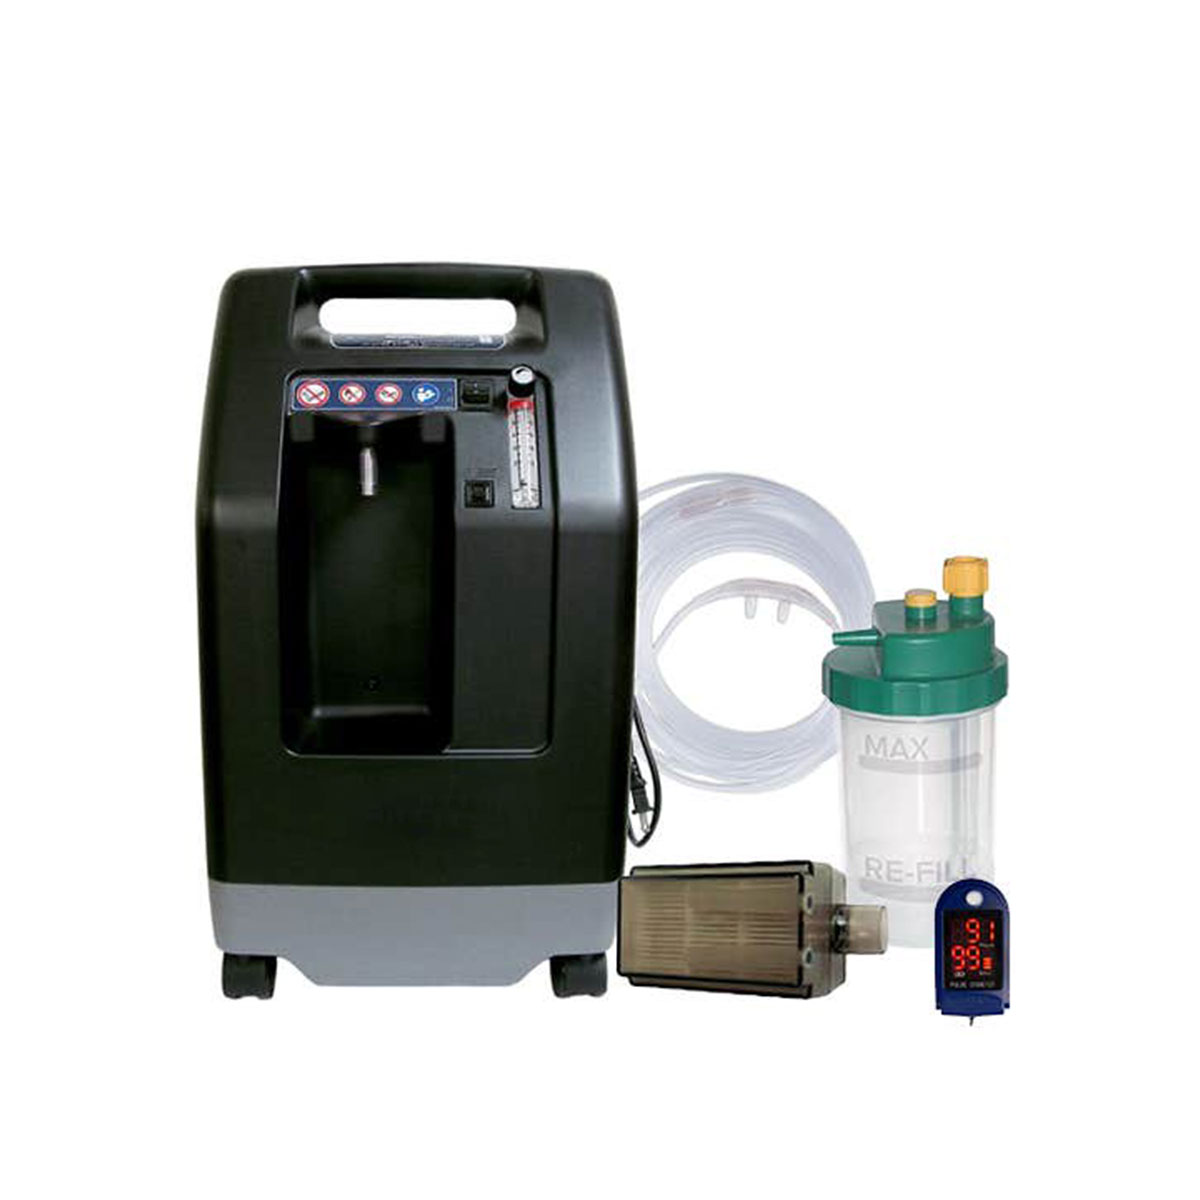 Devilbiss Oxygen Concentrator 5 LPM On Sale Suppliers, Service Provider in Dilshad garden